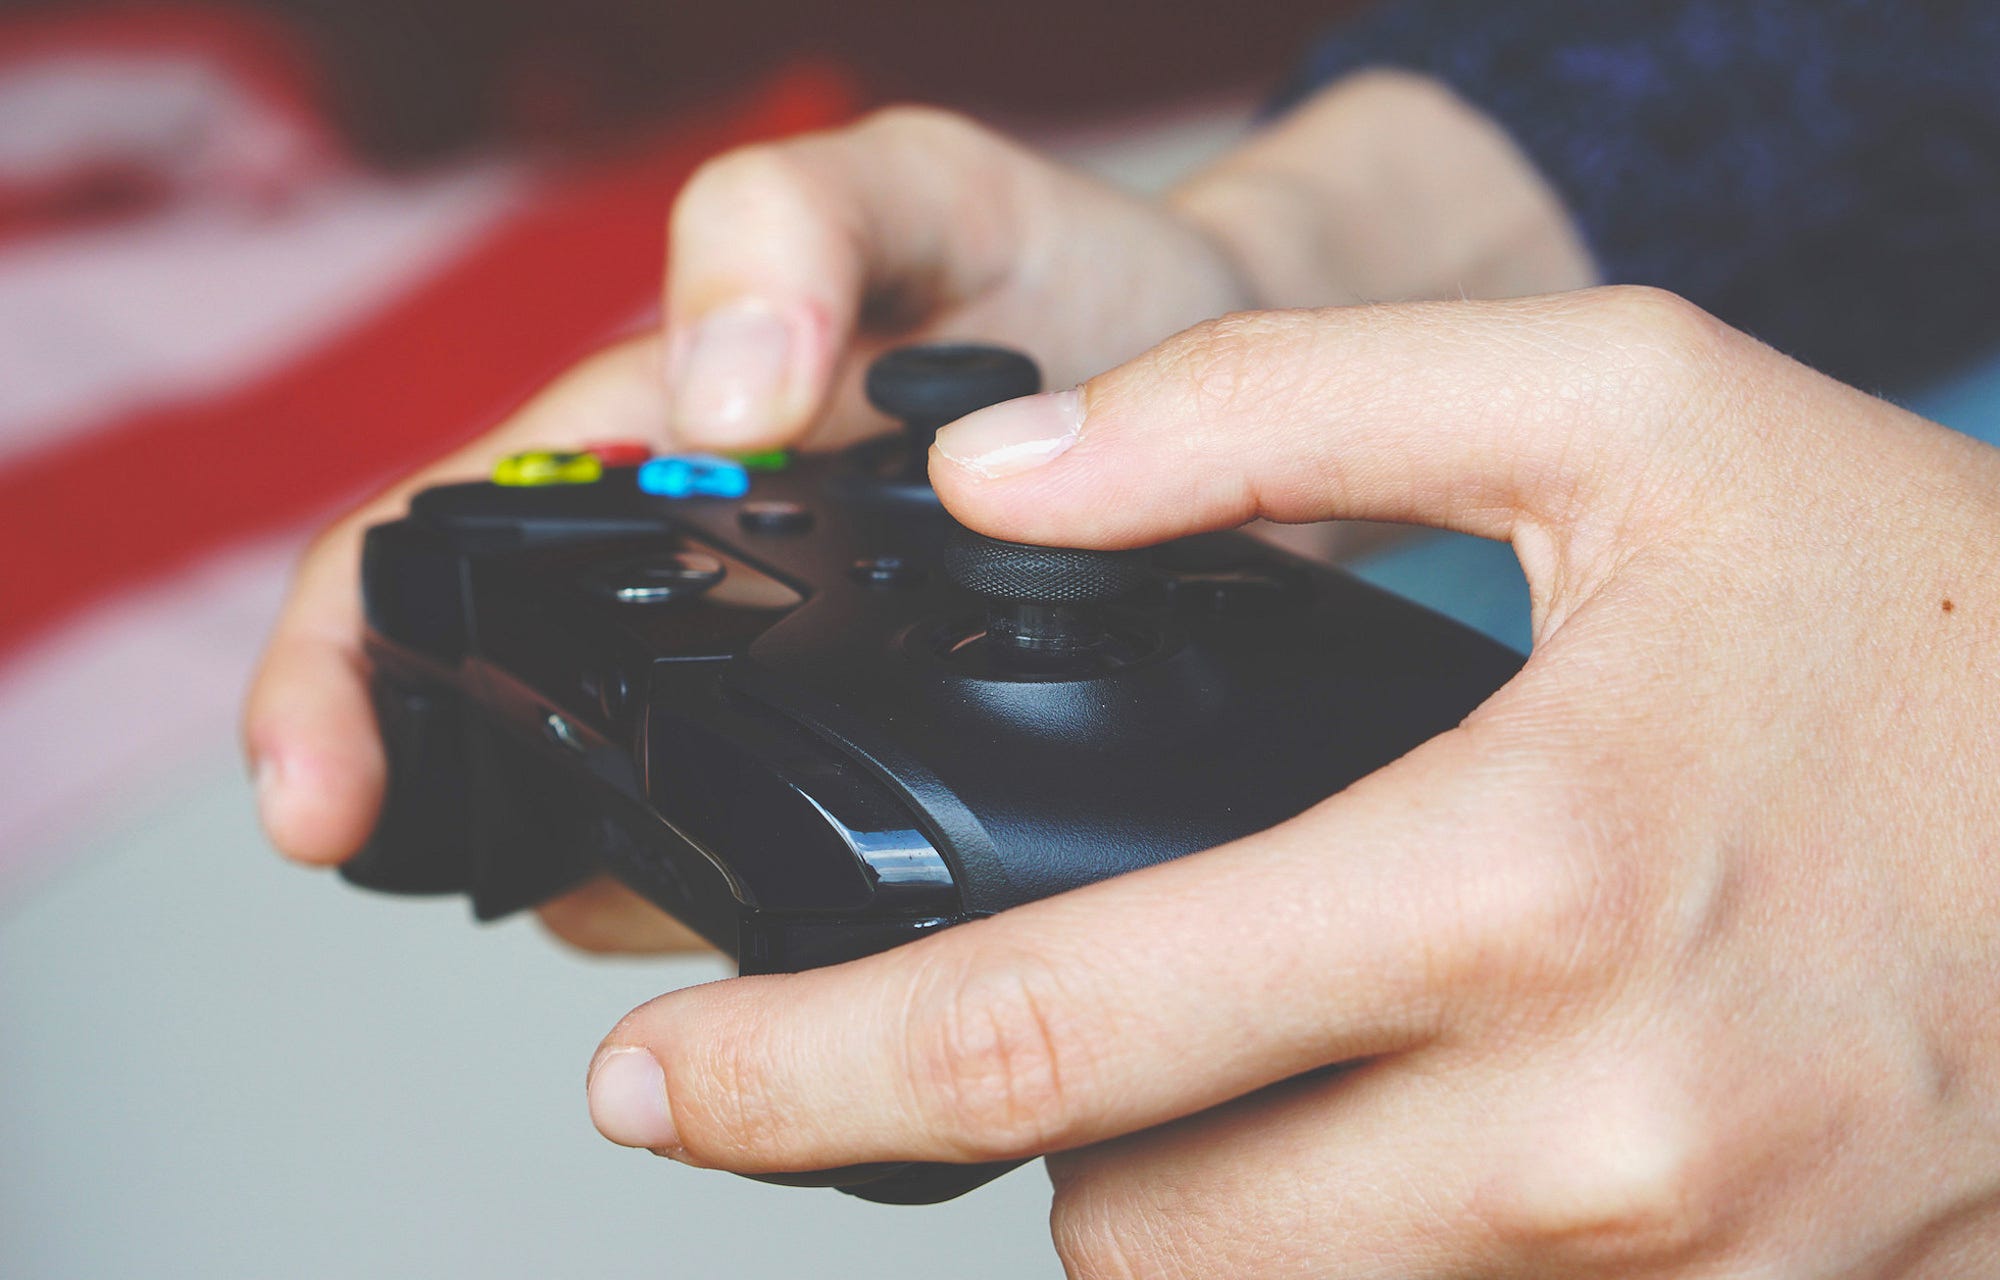 A new job opportunity will pay you to play video games